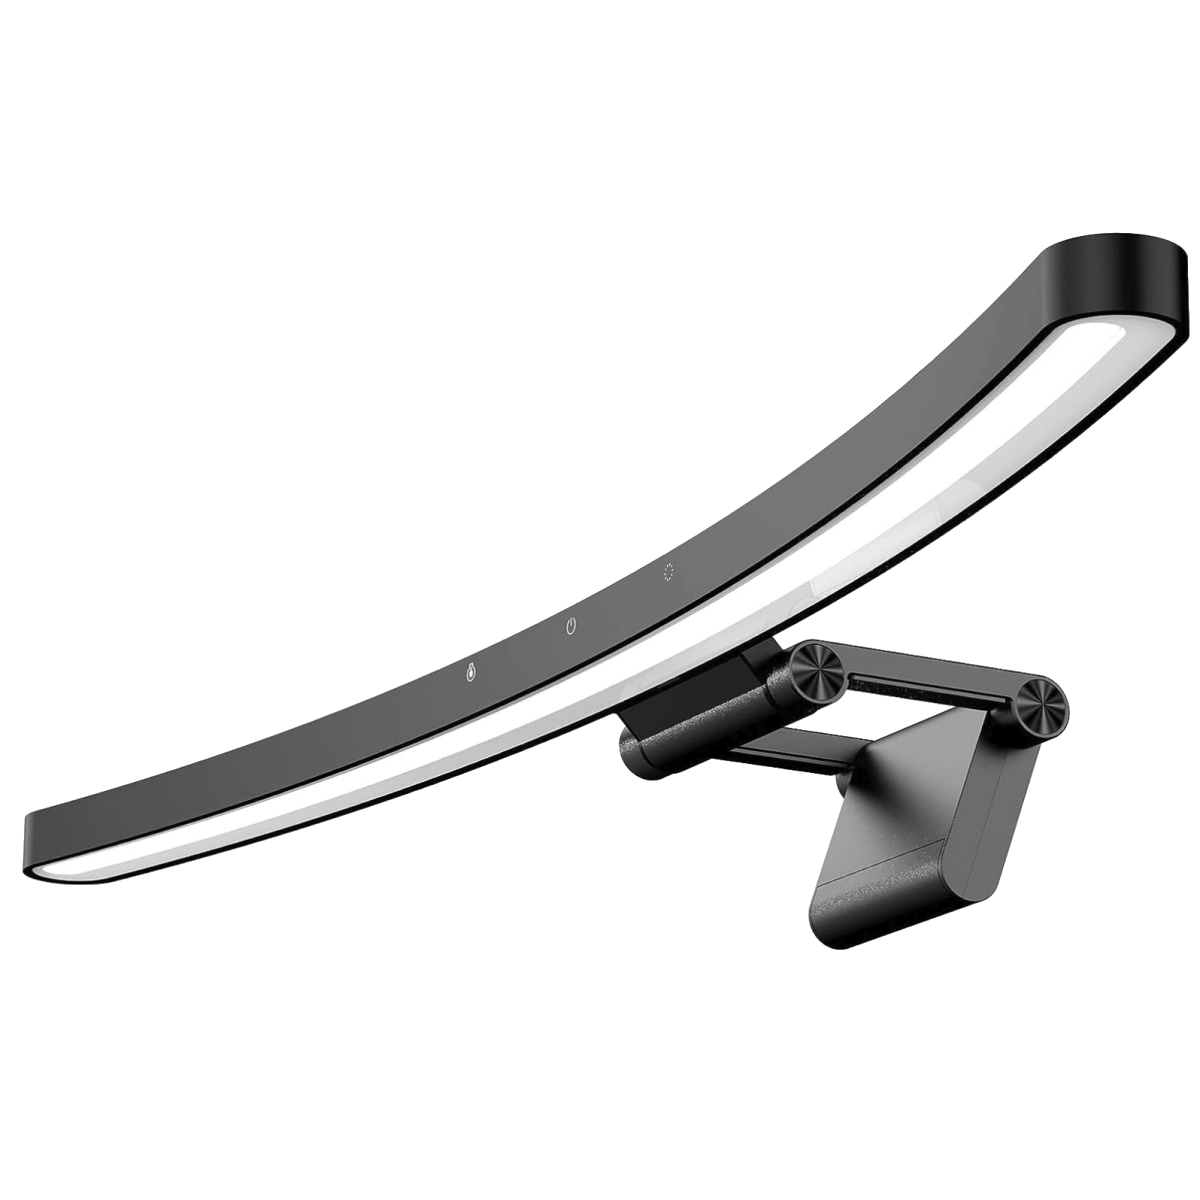 A MELIFO Curved Monitor Light Bar